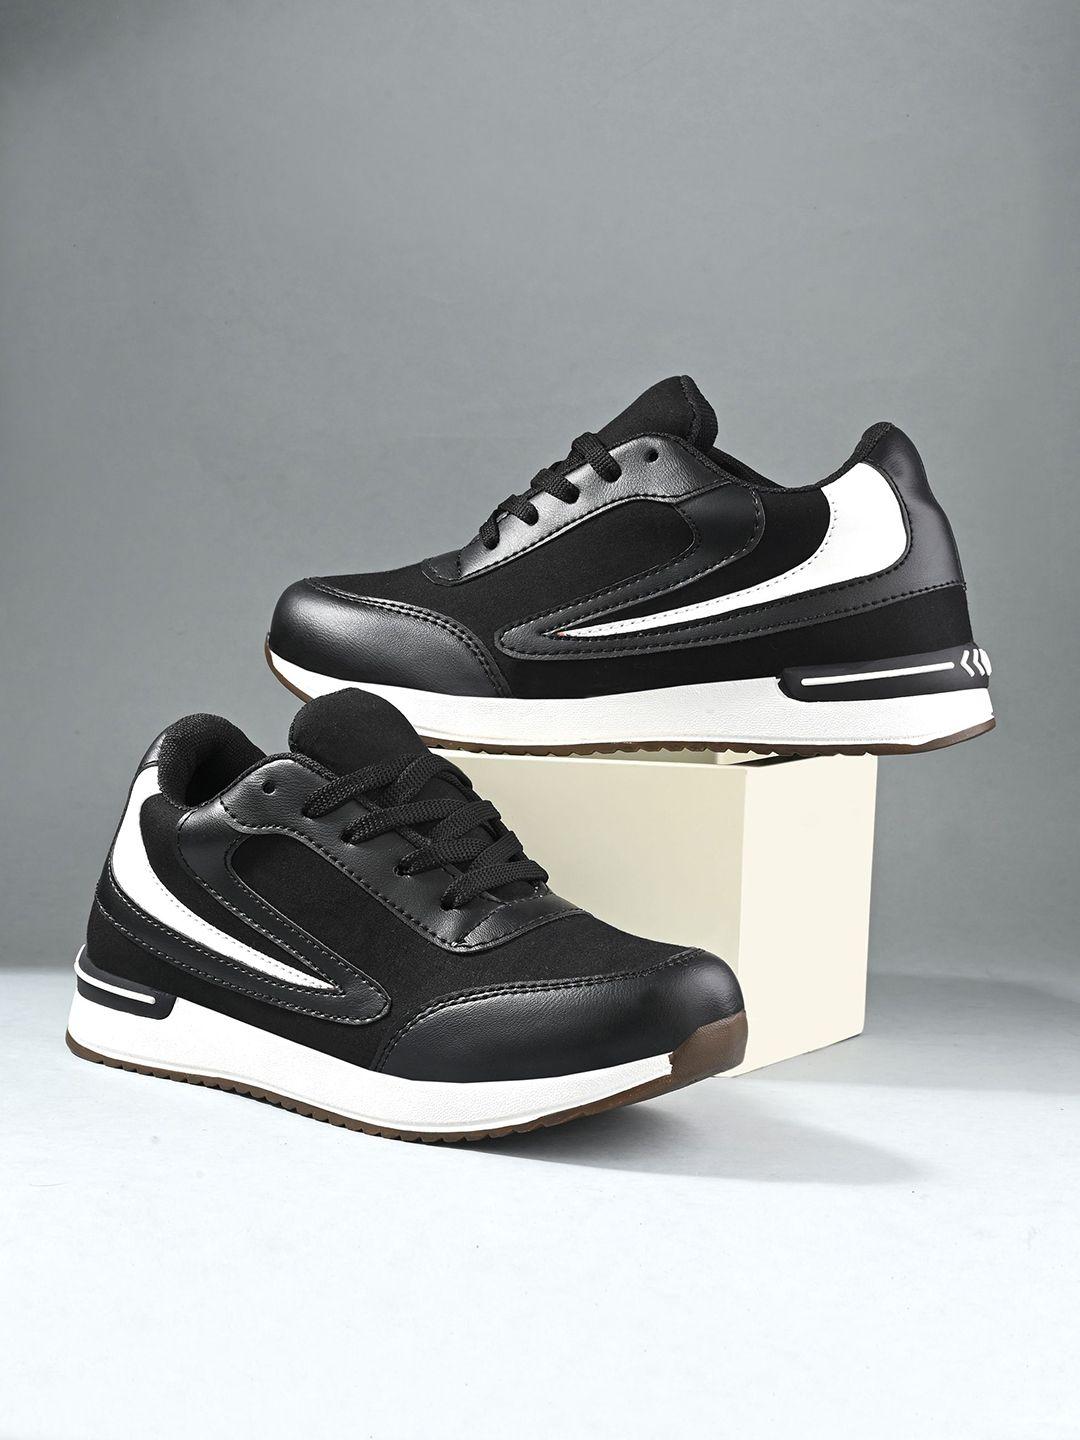 The Roadster Lifestyle Co. Women Black & White Colourblocked Lightweight Sneakers